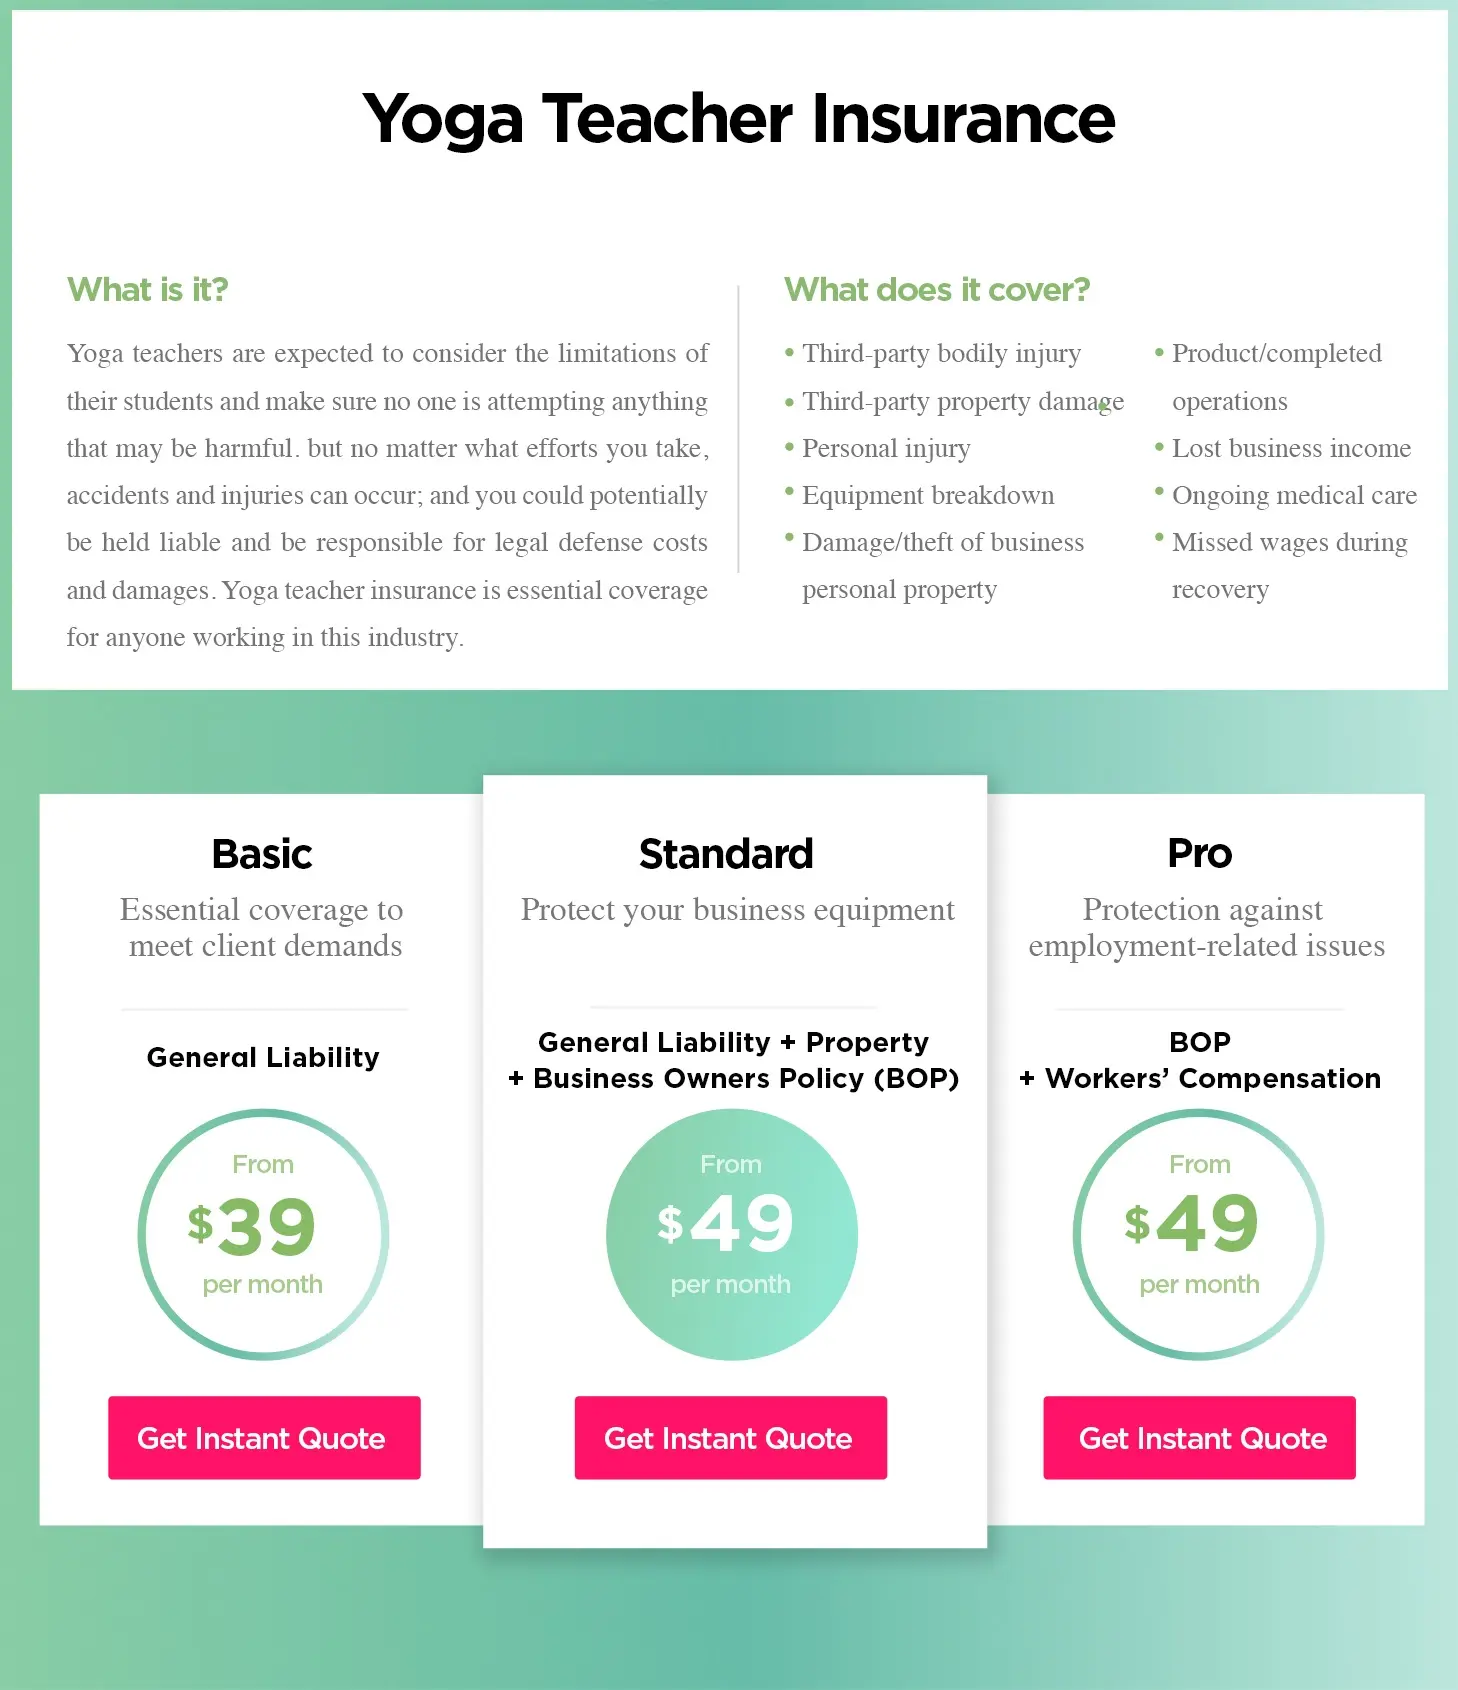 yoga instructor liability insurance - What is professional liability covered under